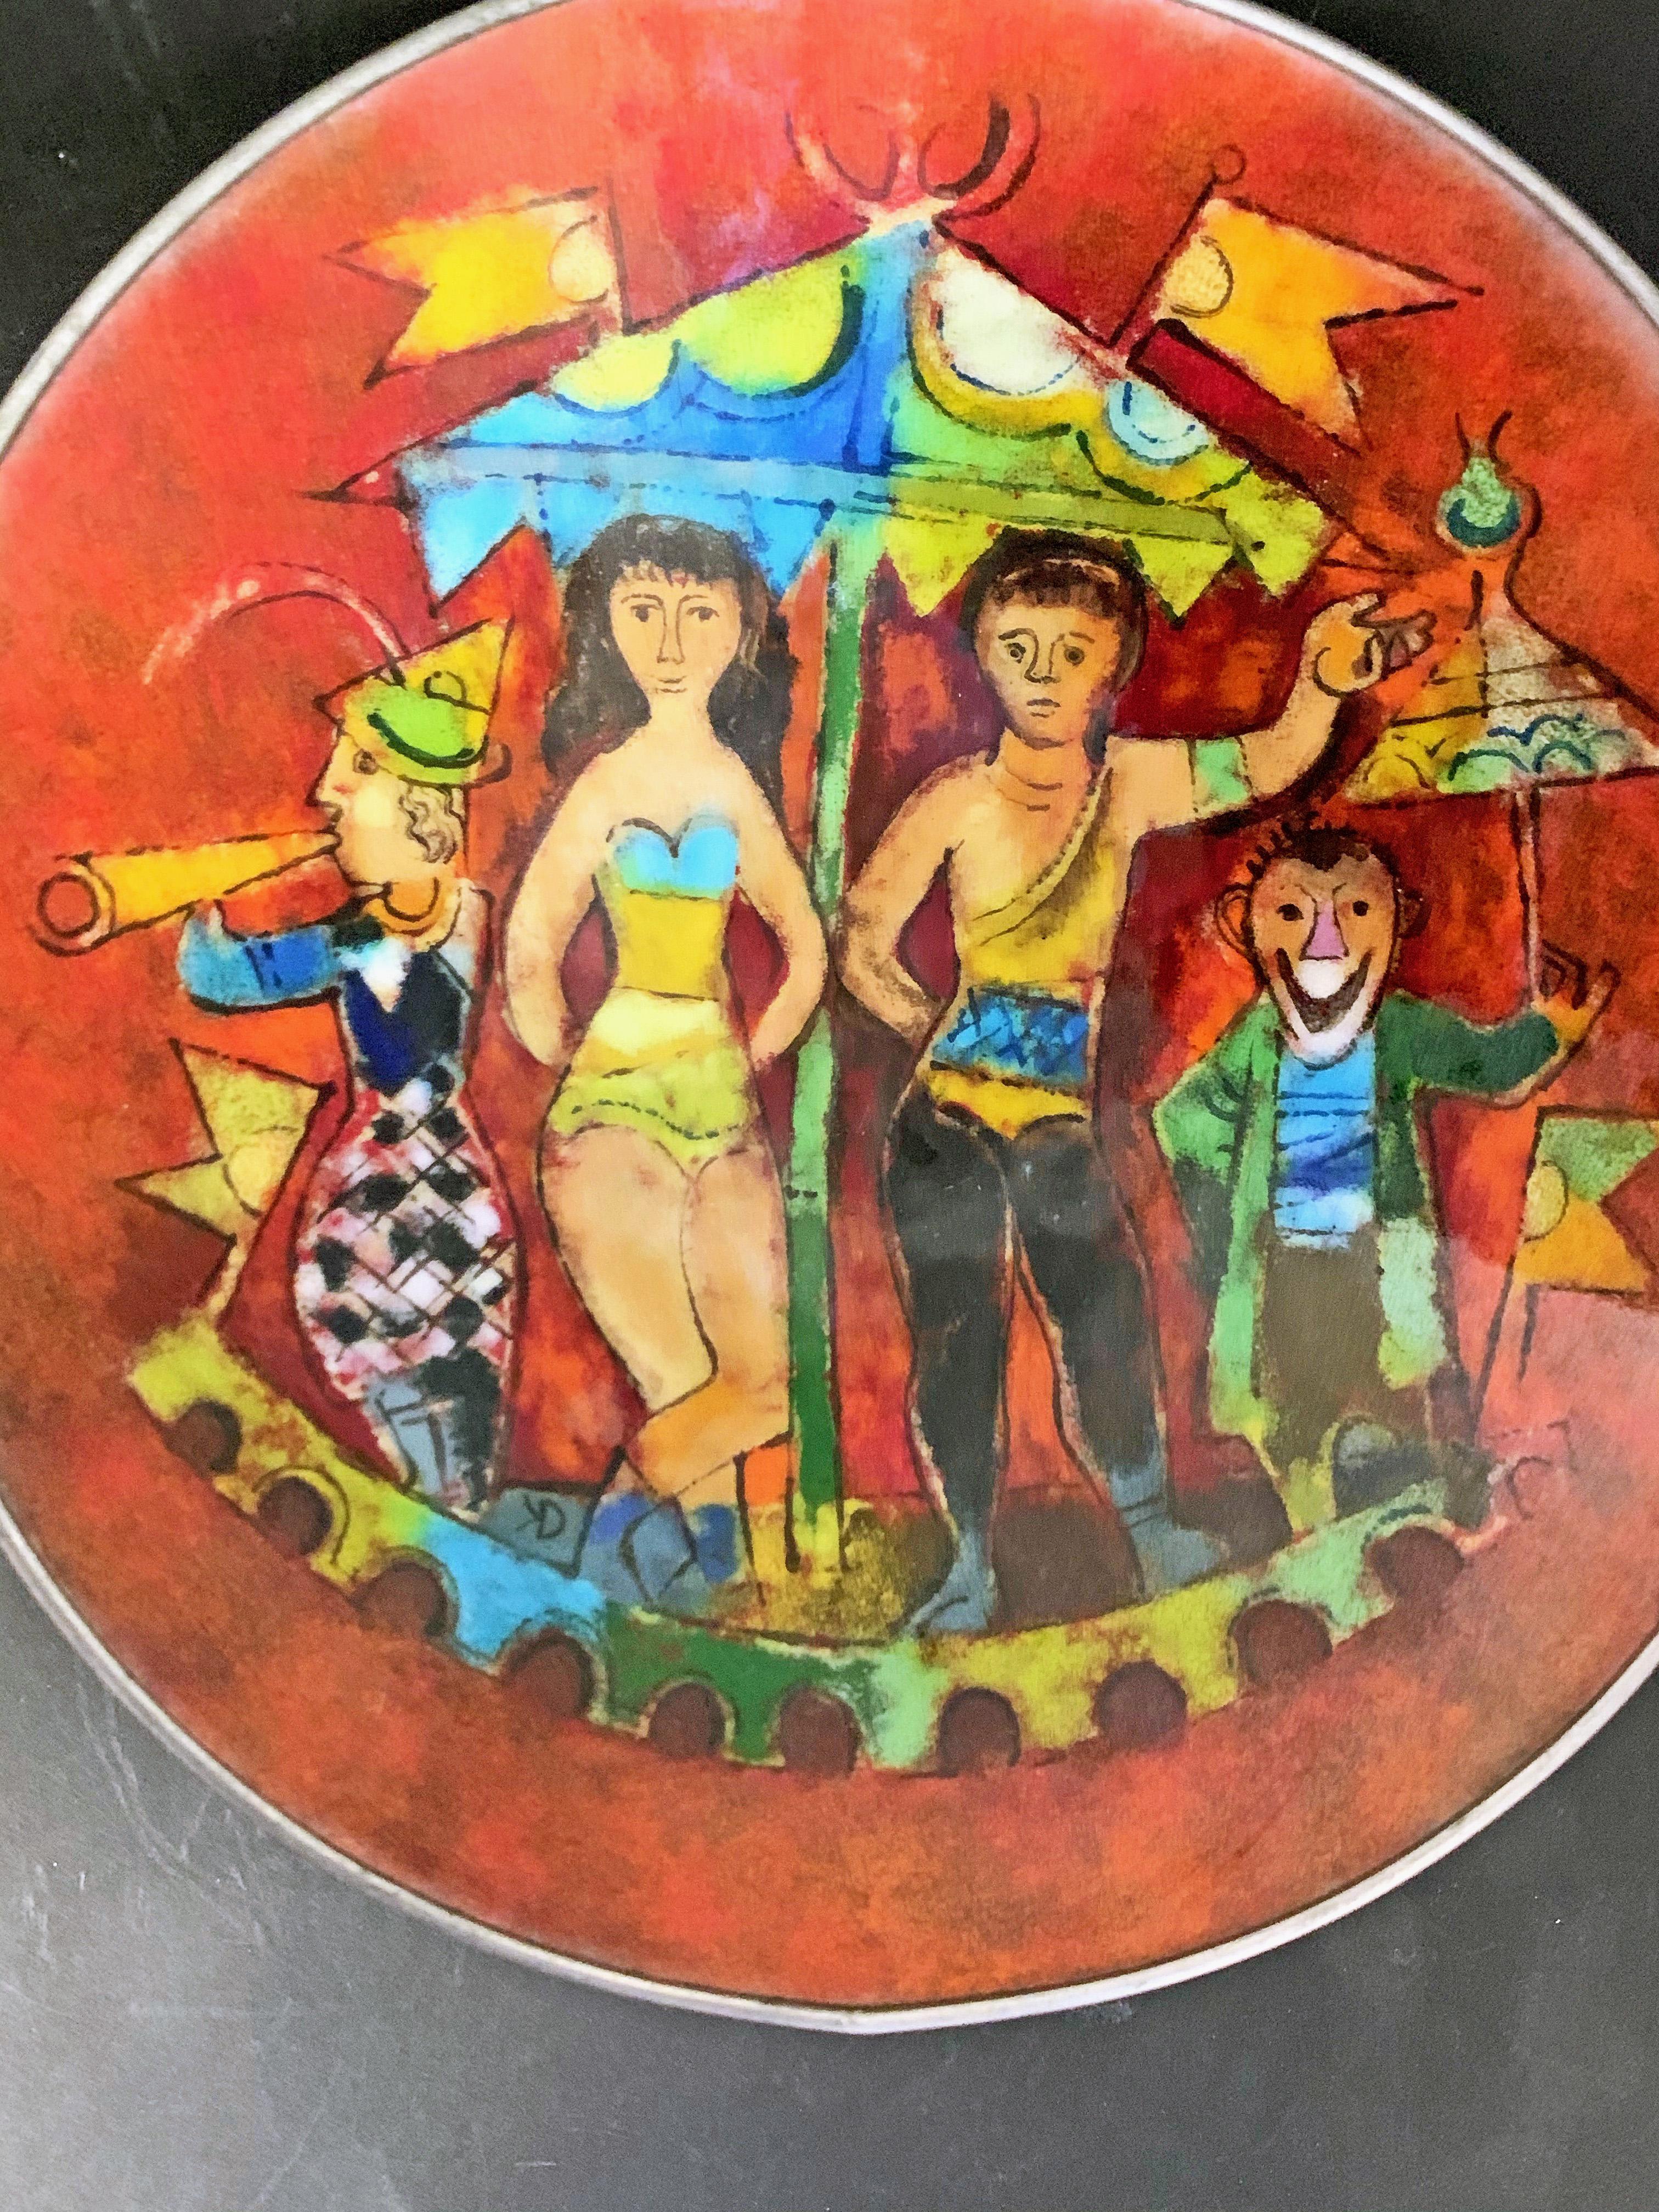 This brilliantly-hued enamel bowl showing a circus scene, complete with trapeze artists, musician and clown, is a tour de force of midcentury enamel art. It was created by the famed enamel artist, Karl Drerup, who immigrated to America from Germany